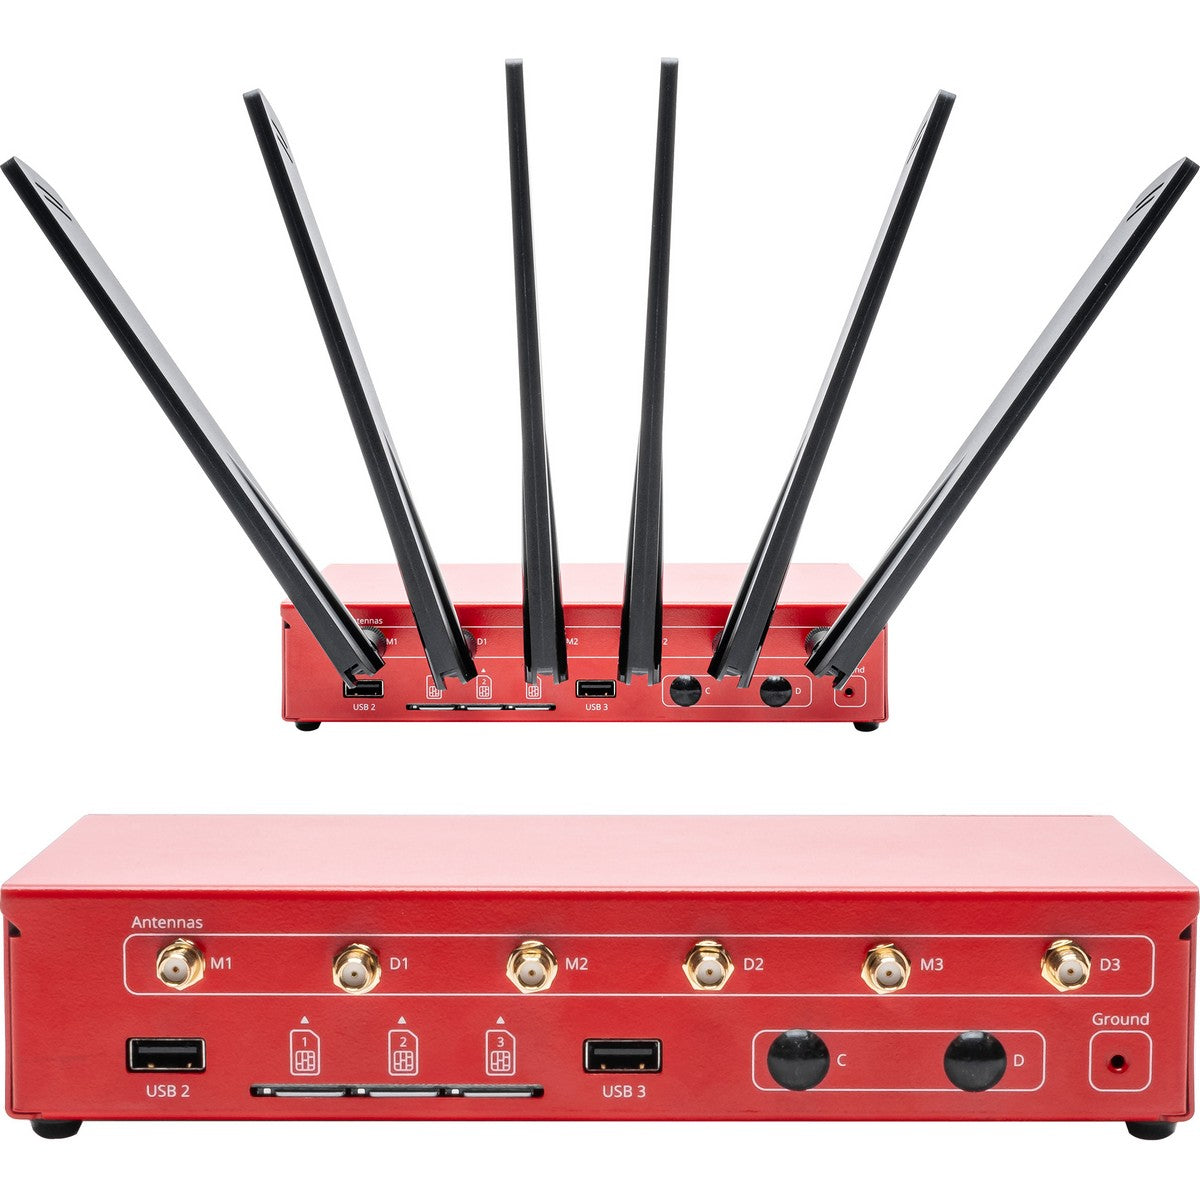 MR-NET+ Self Redundant Streaming IP Multi-Router with 3 LTE Modems